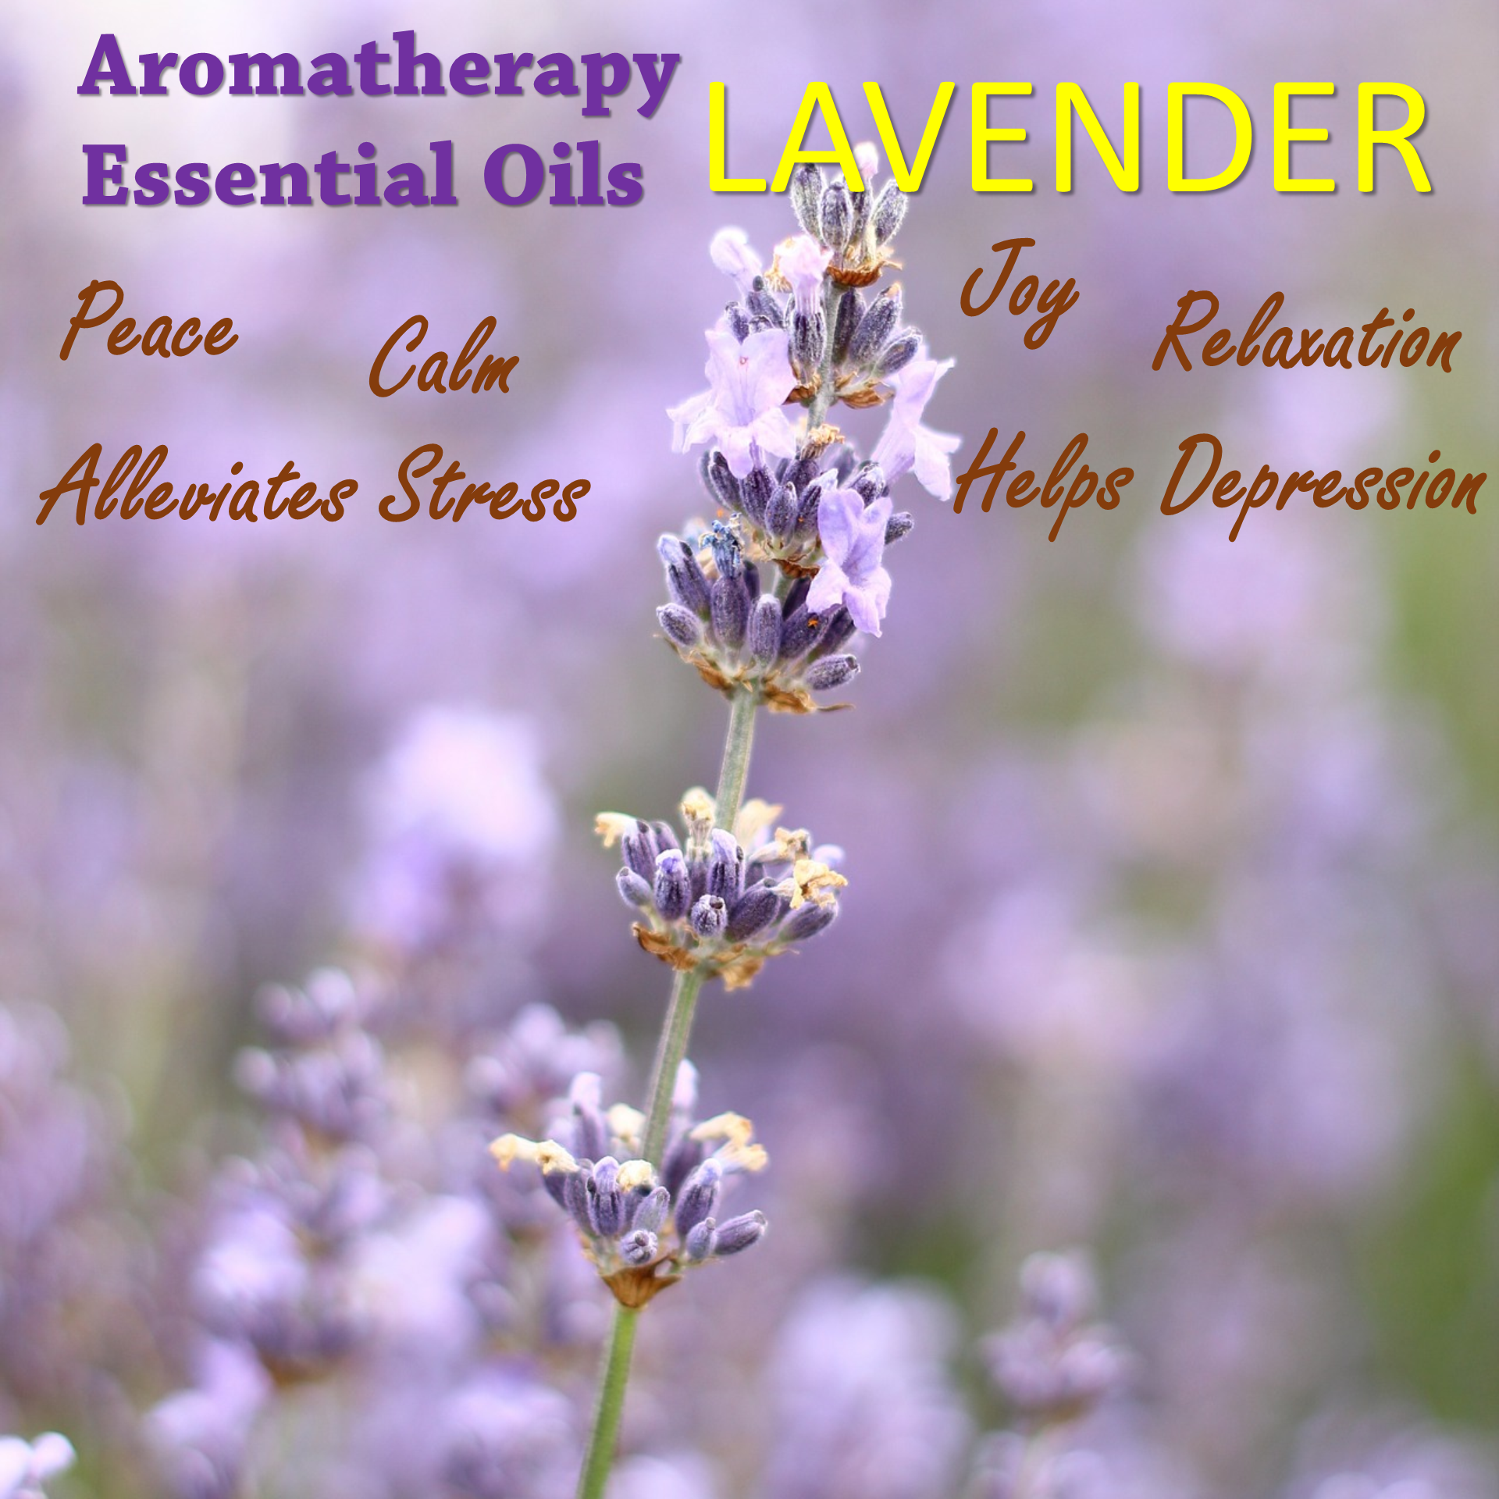 aromatherapy, holistic wellbeing